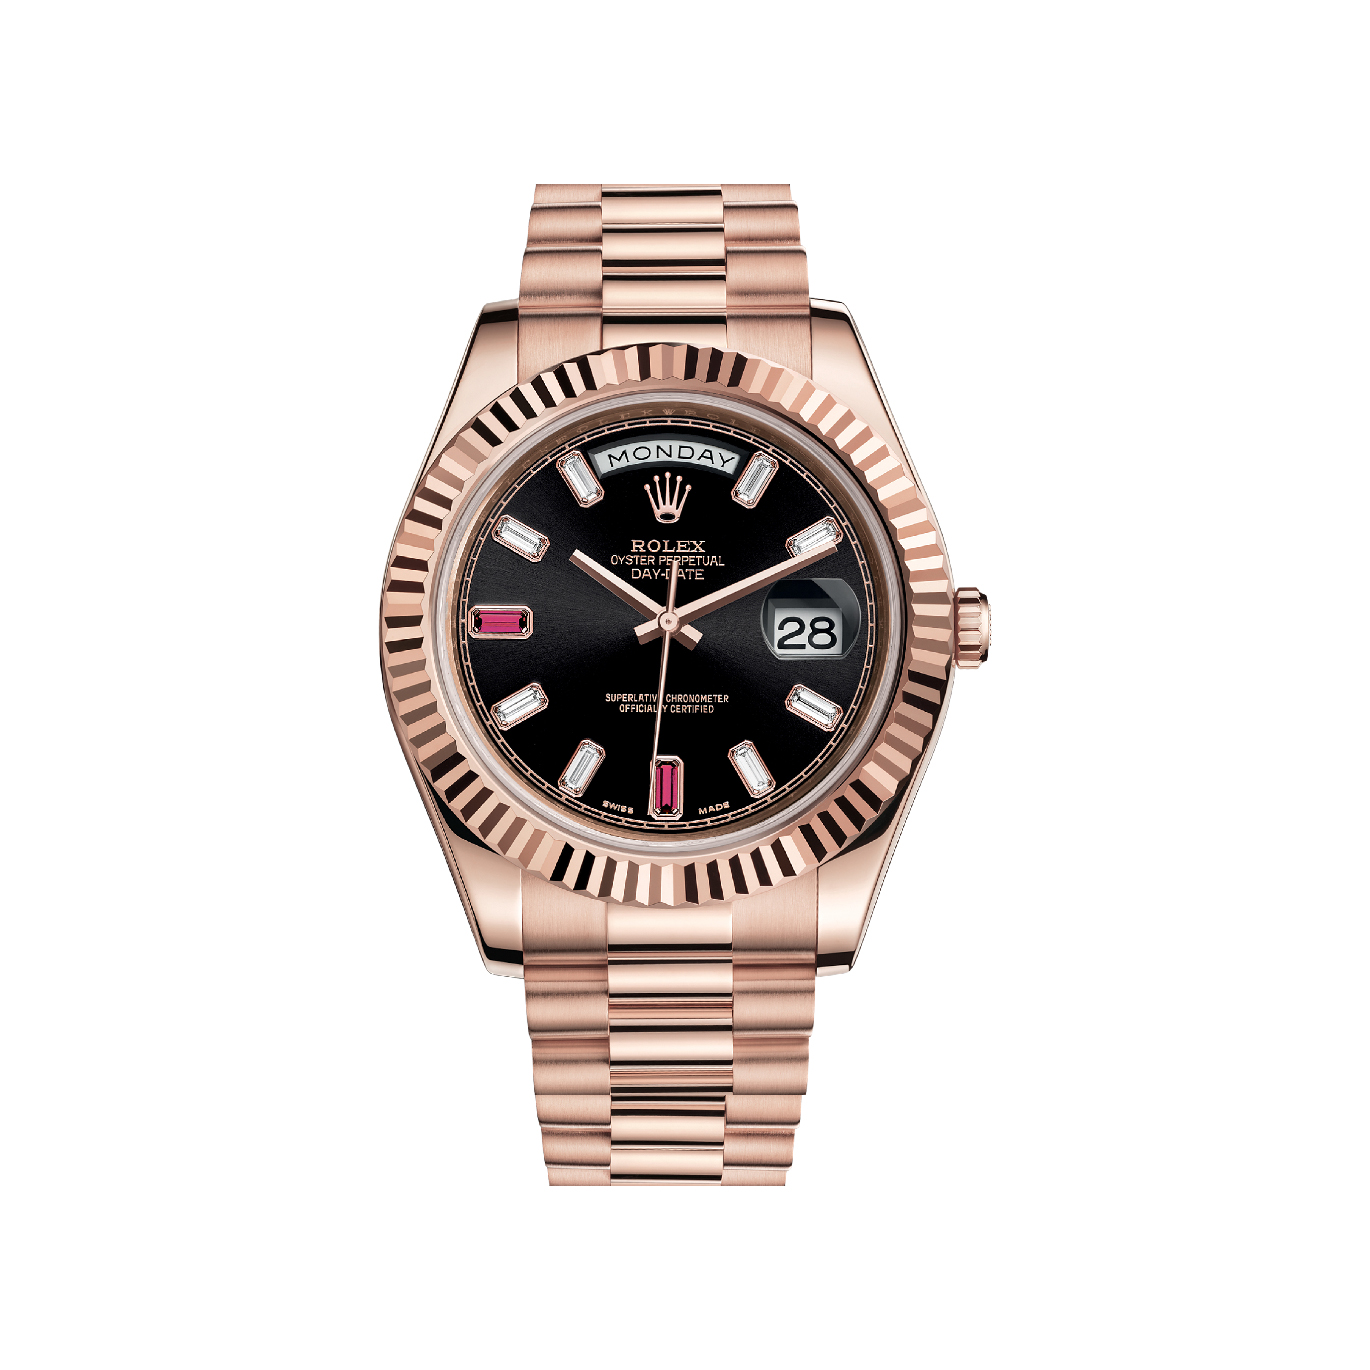 Day-Date II 218235 Rose Gold Watch (Black Set with Diamonds And Rubies)